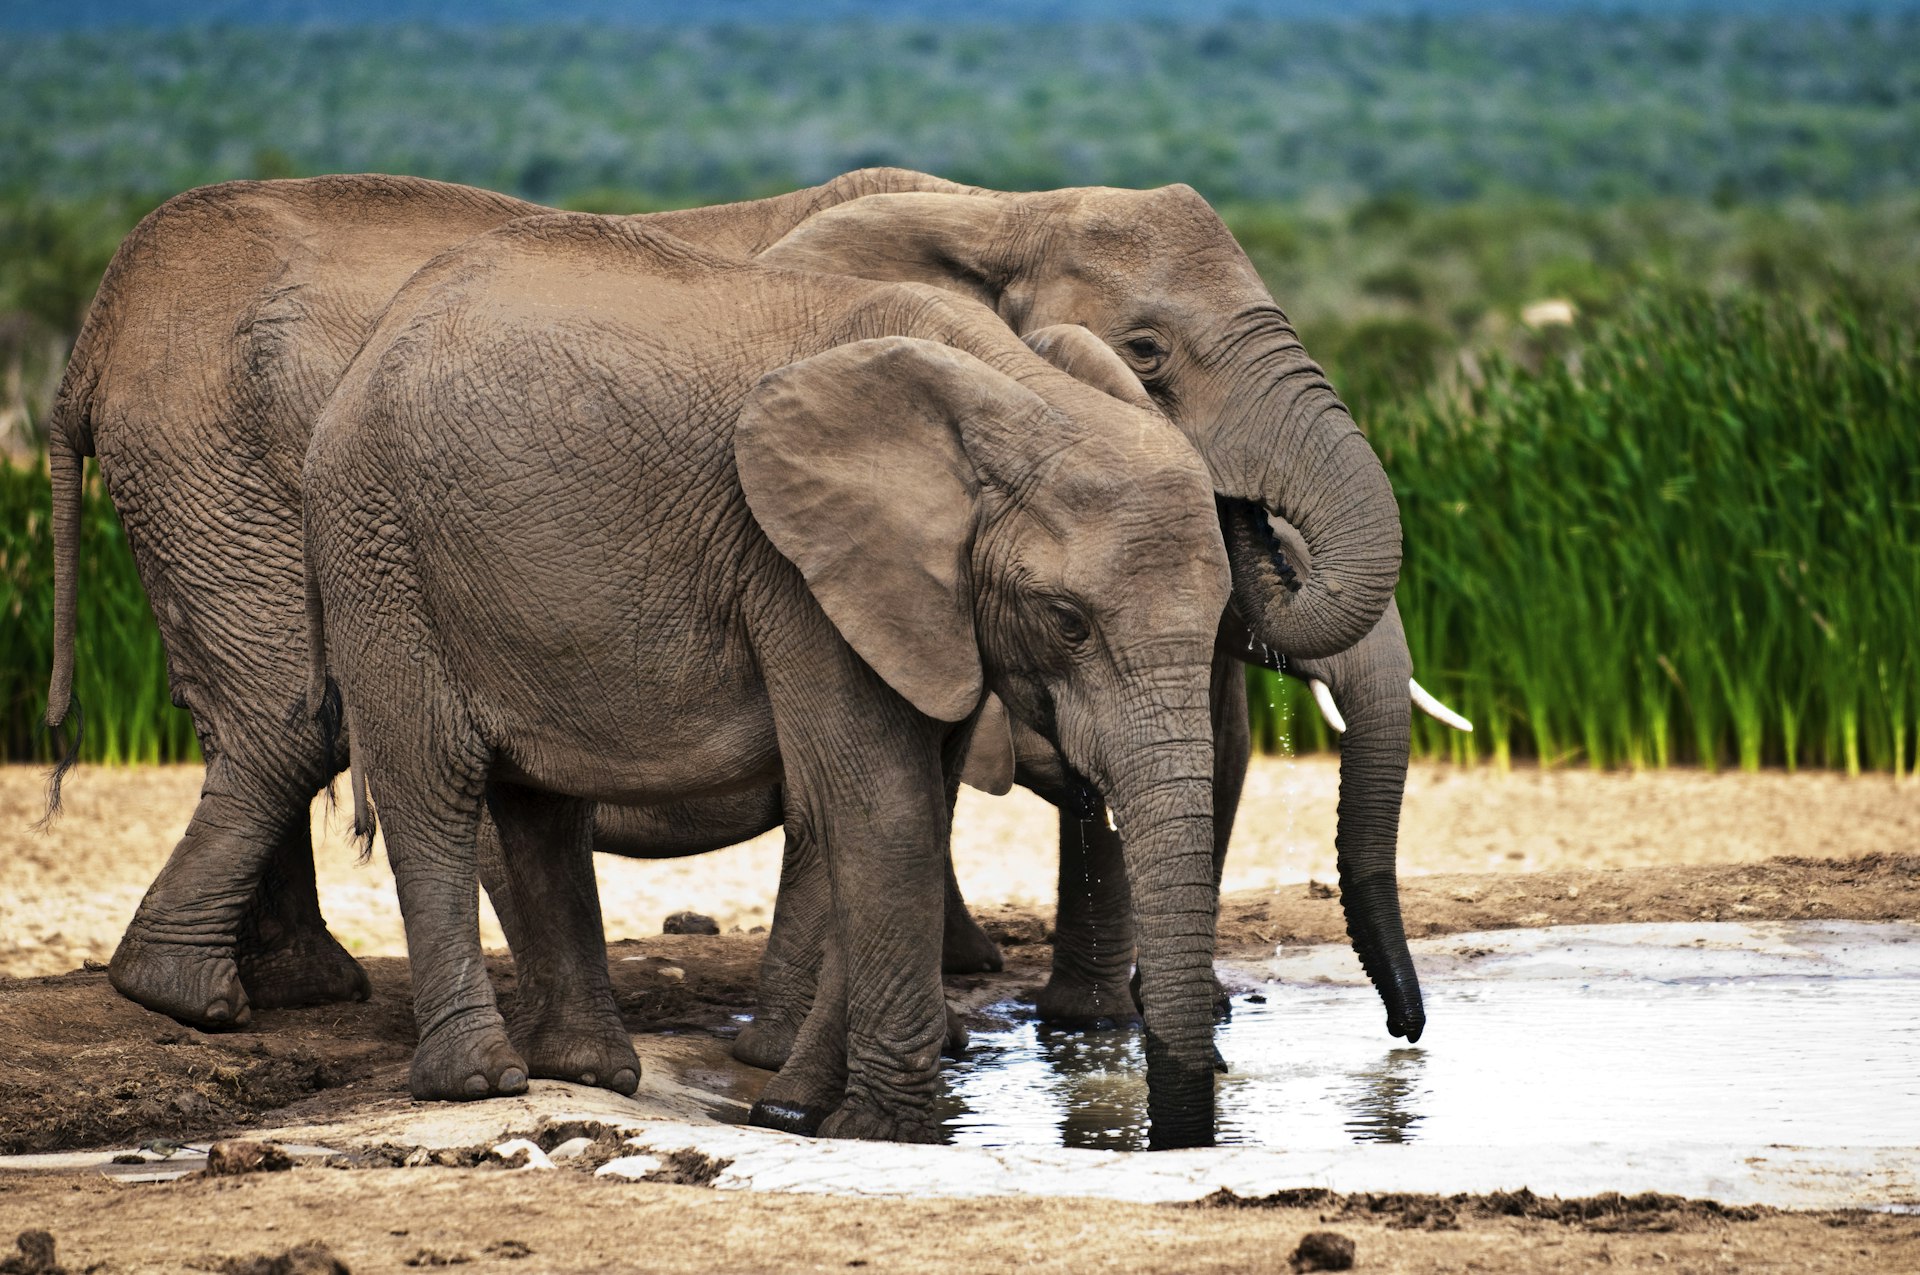 Elephants drinking at water hole at Addo Elephant National Park in South Africa